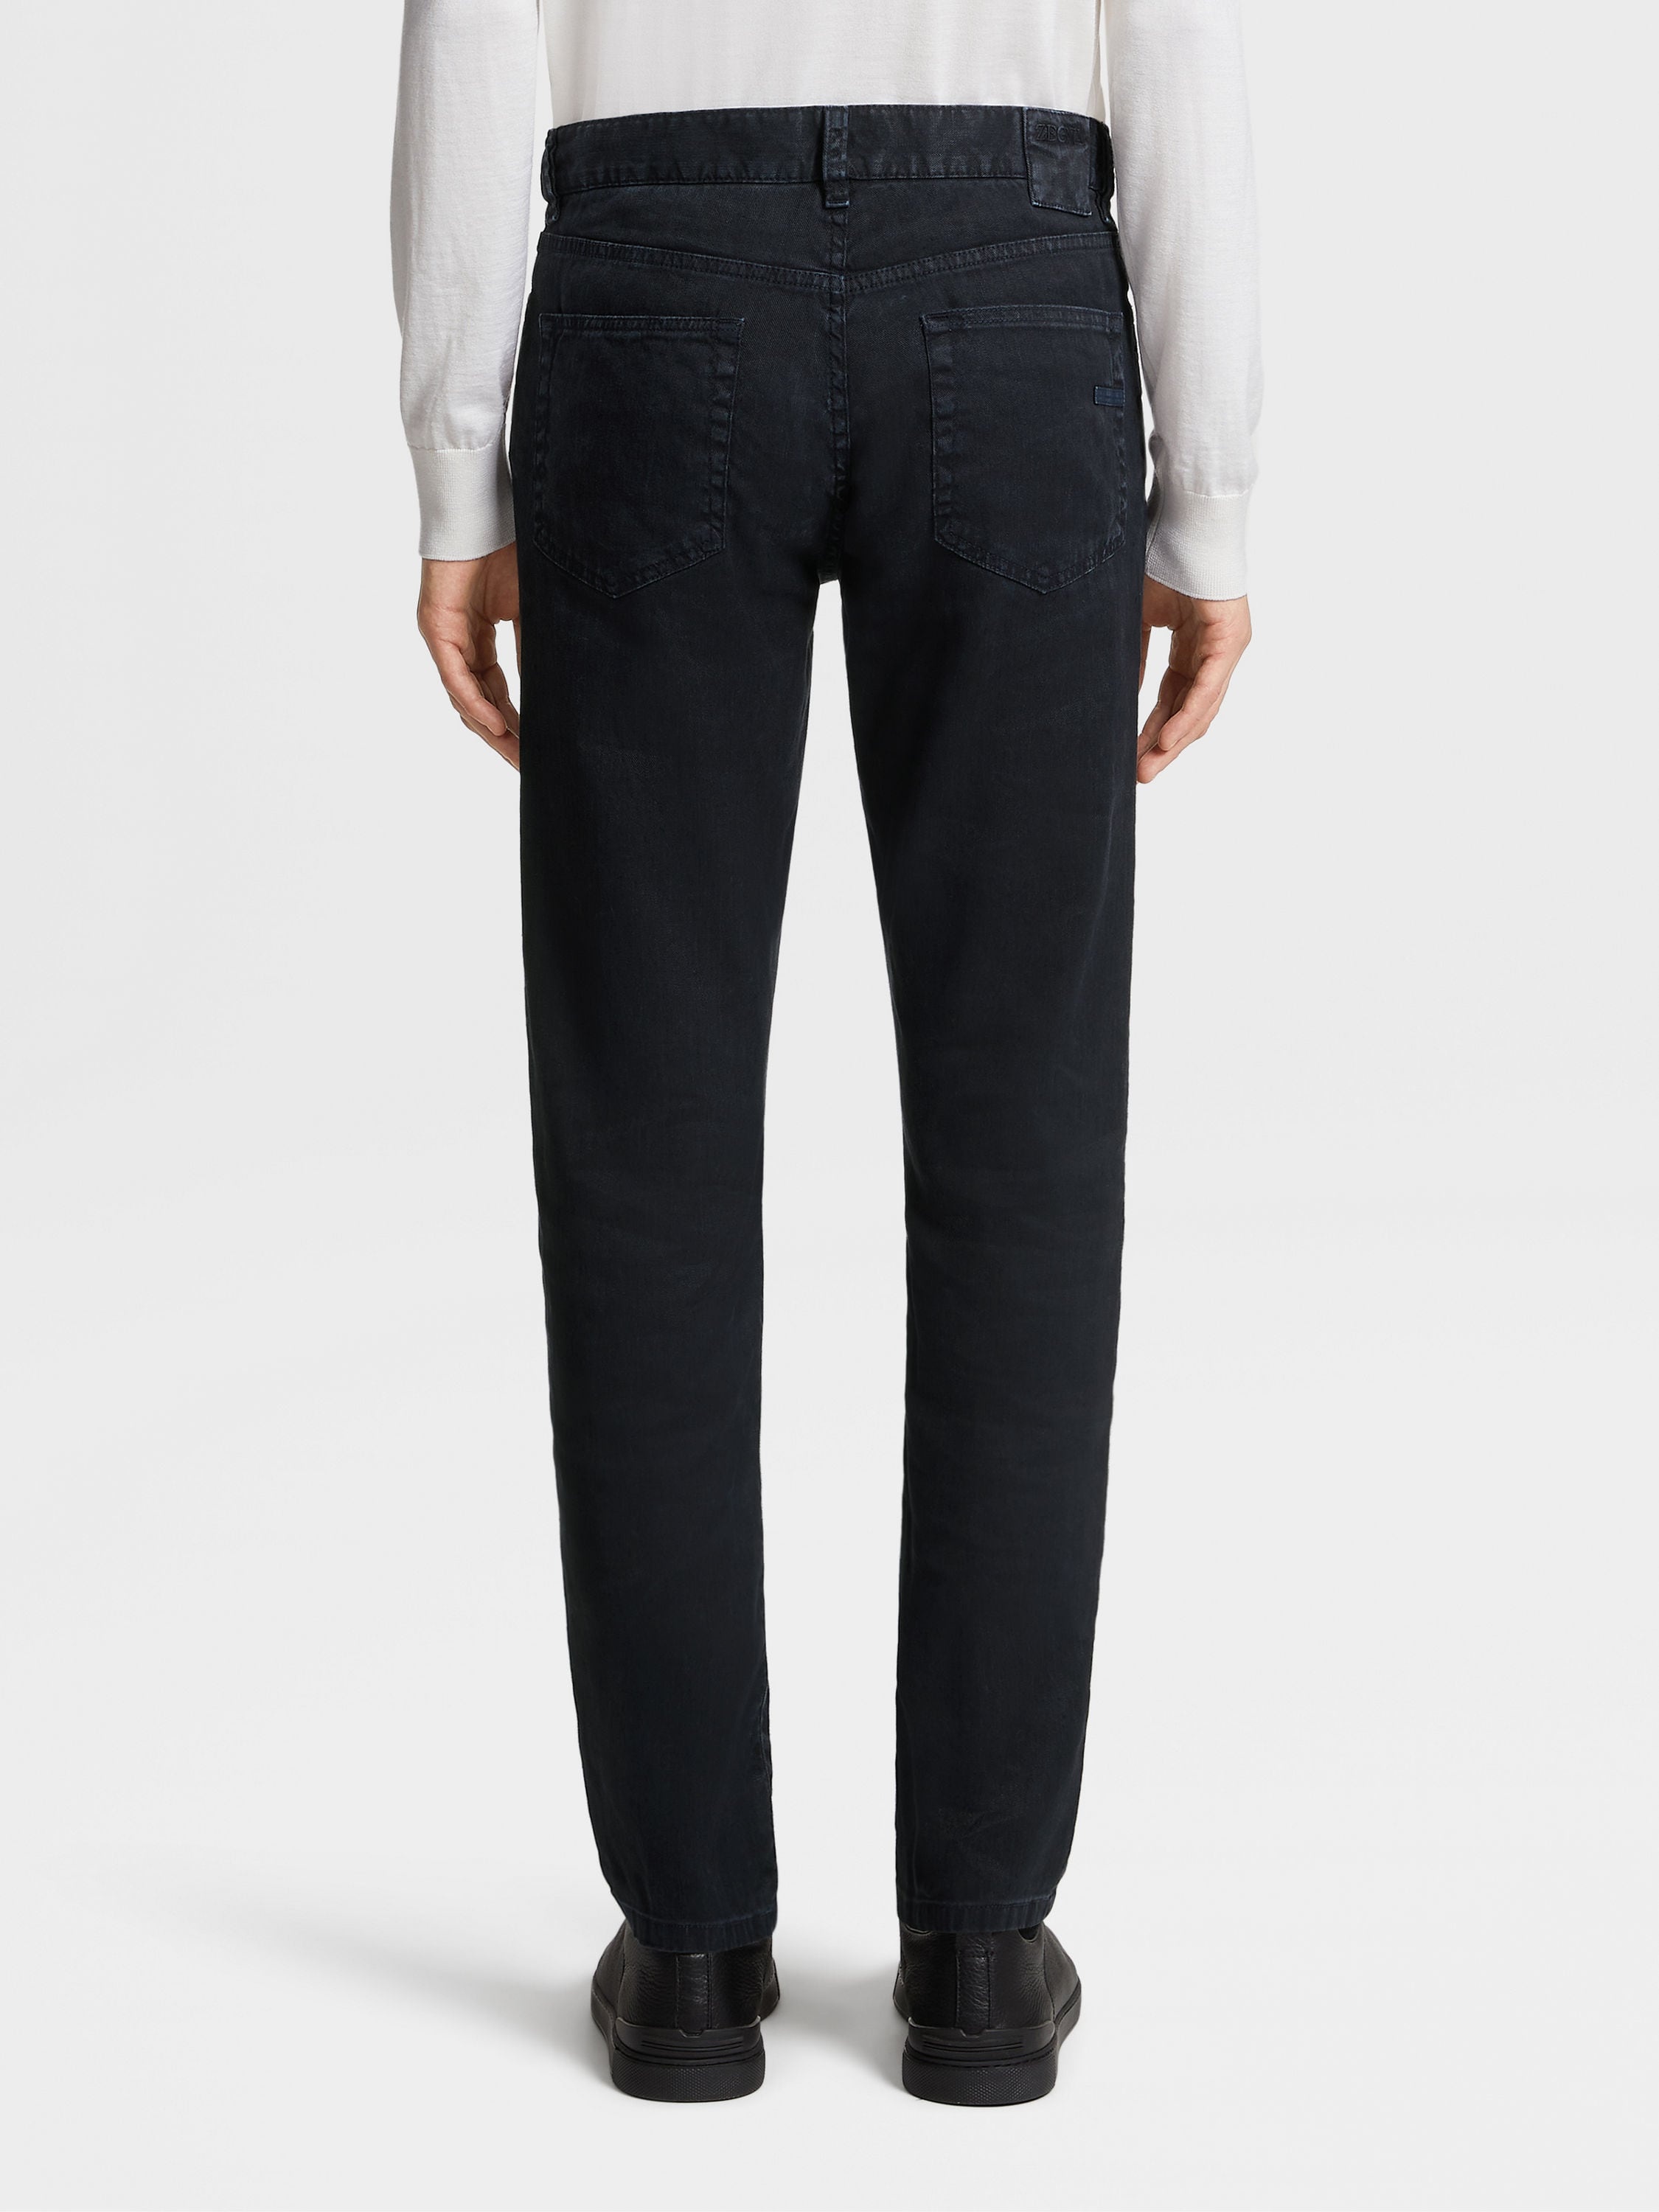 NAVY BLUE STRETCH LINEN AND COTTON JEANS - 3